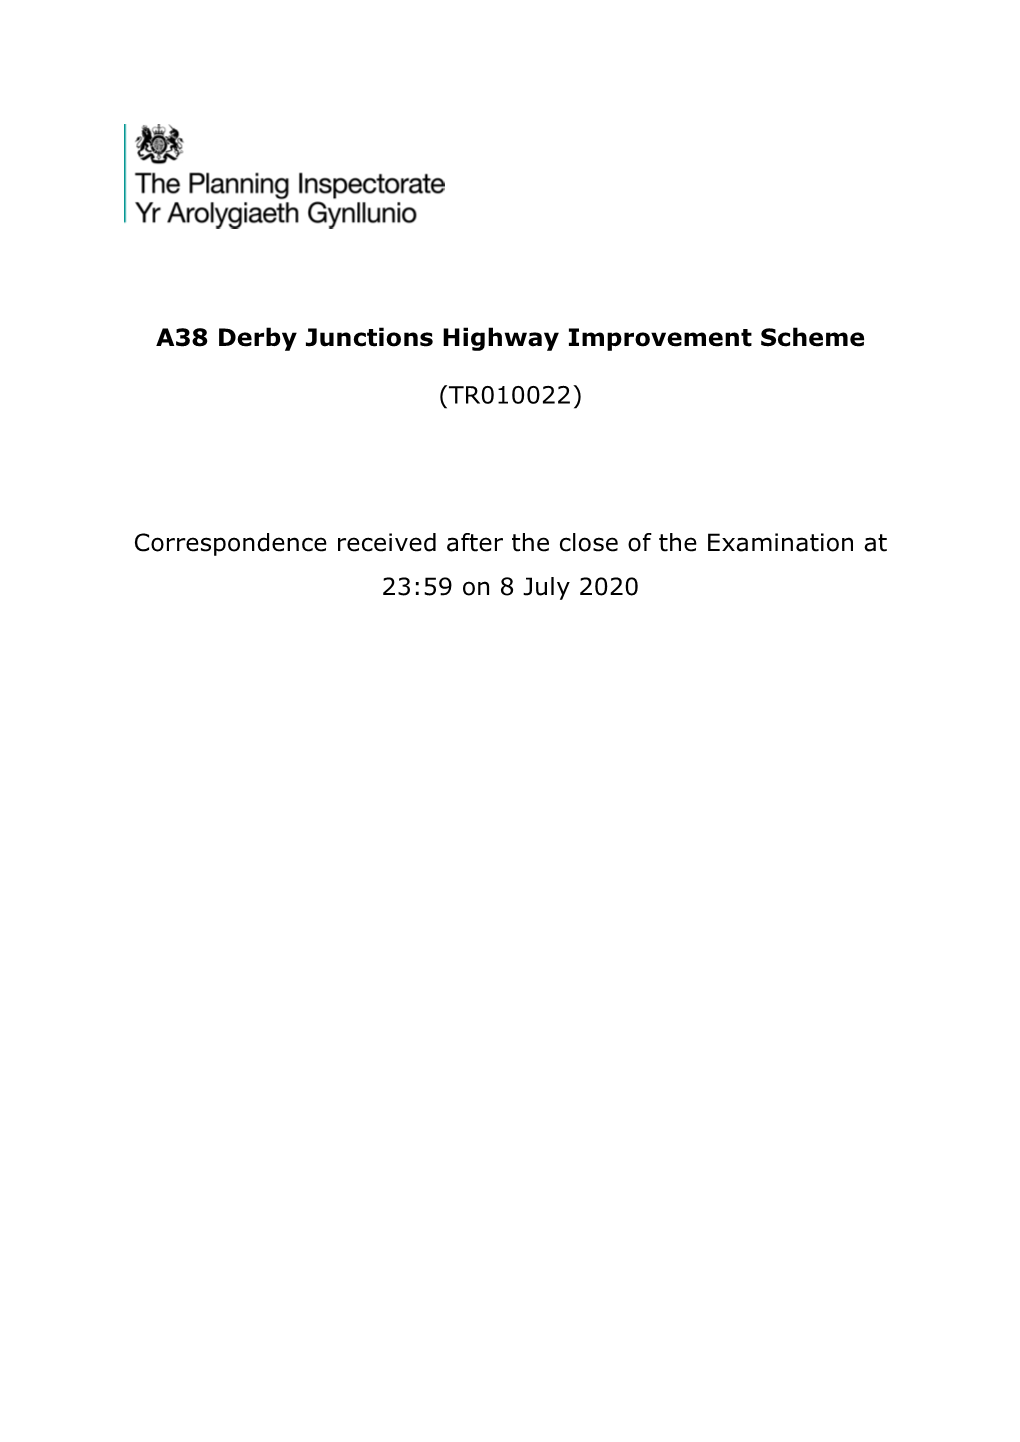 A38 Derby Junctions Highway Improvement Scheme (TR010022) Correspondence Received After the Close of the Examination at 23:59 O